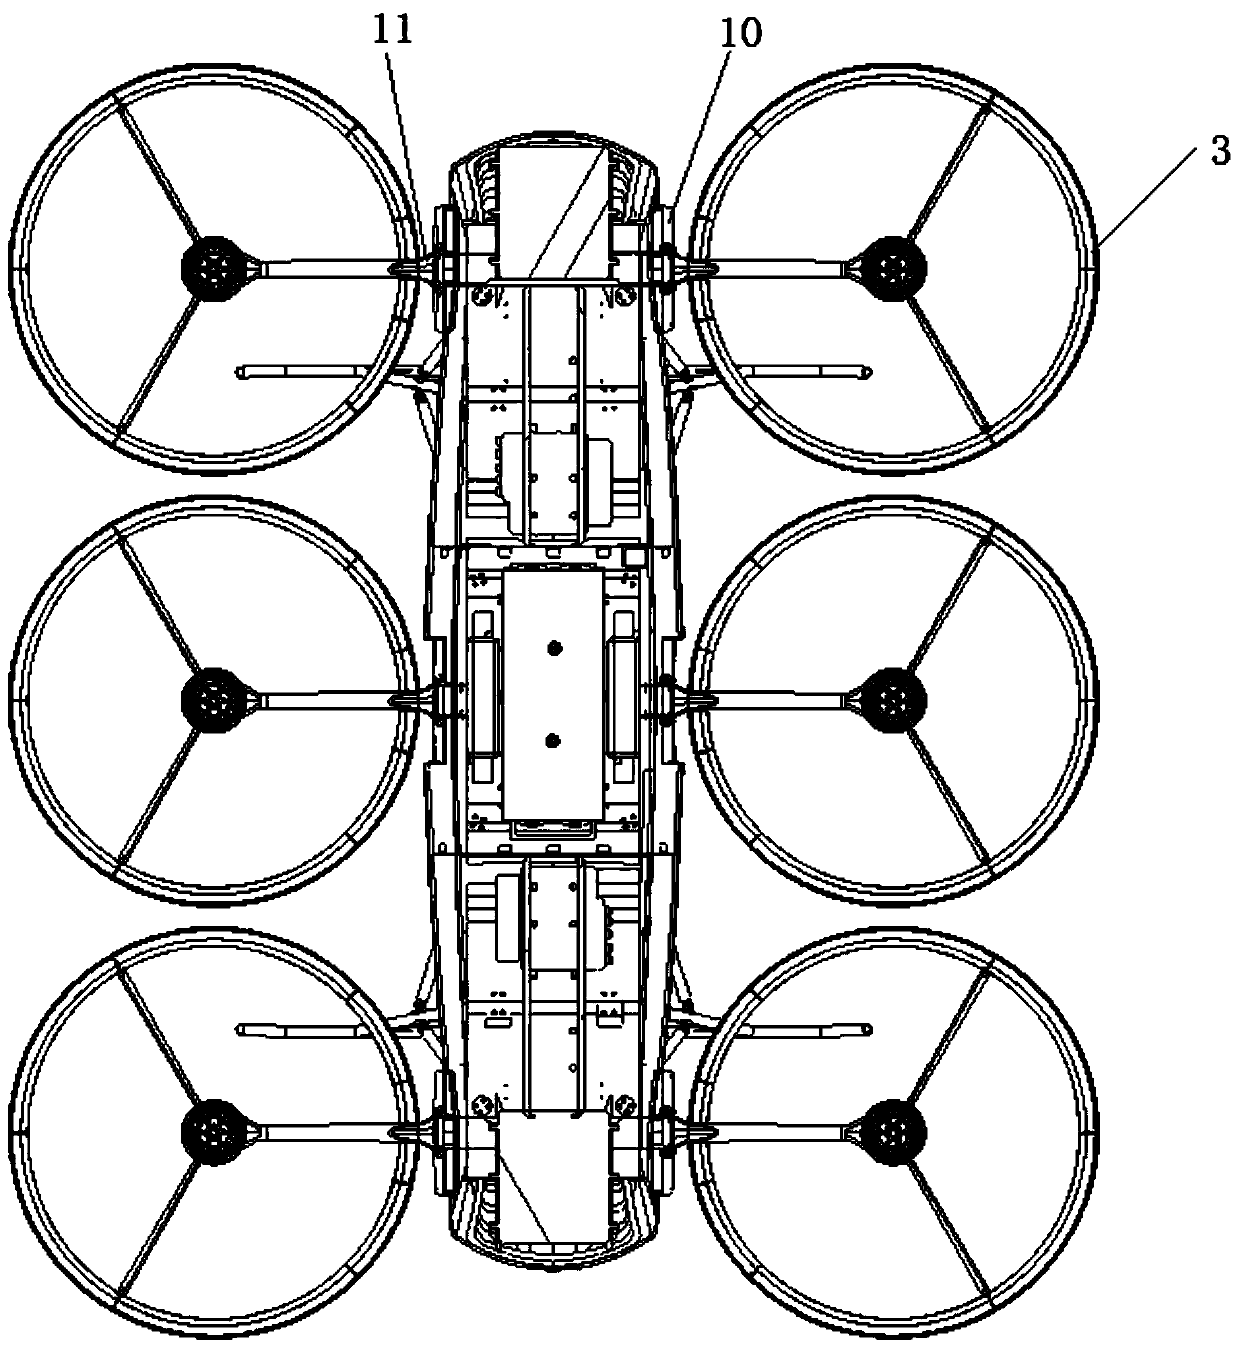 Cabin structure of aircraft, aircraft and flying car